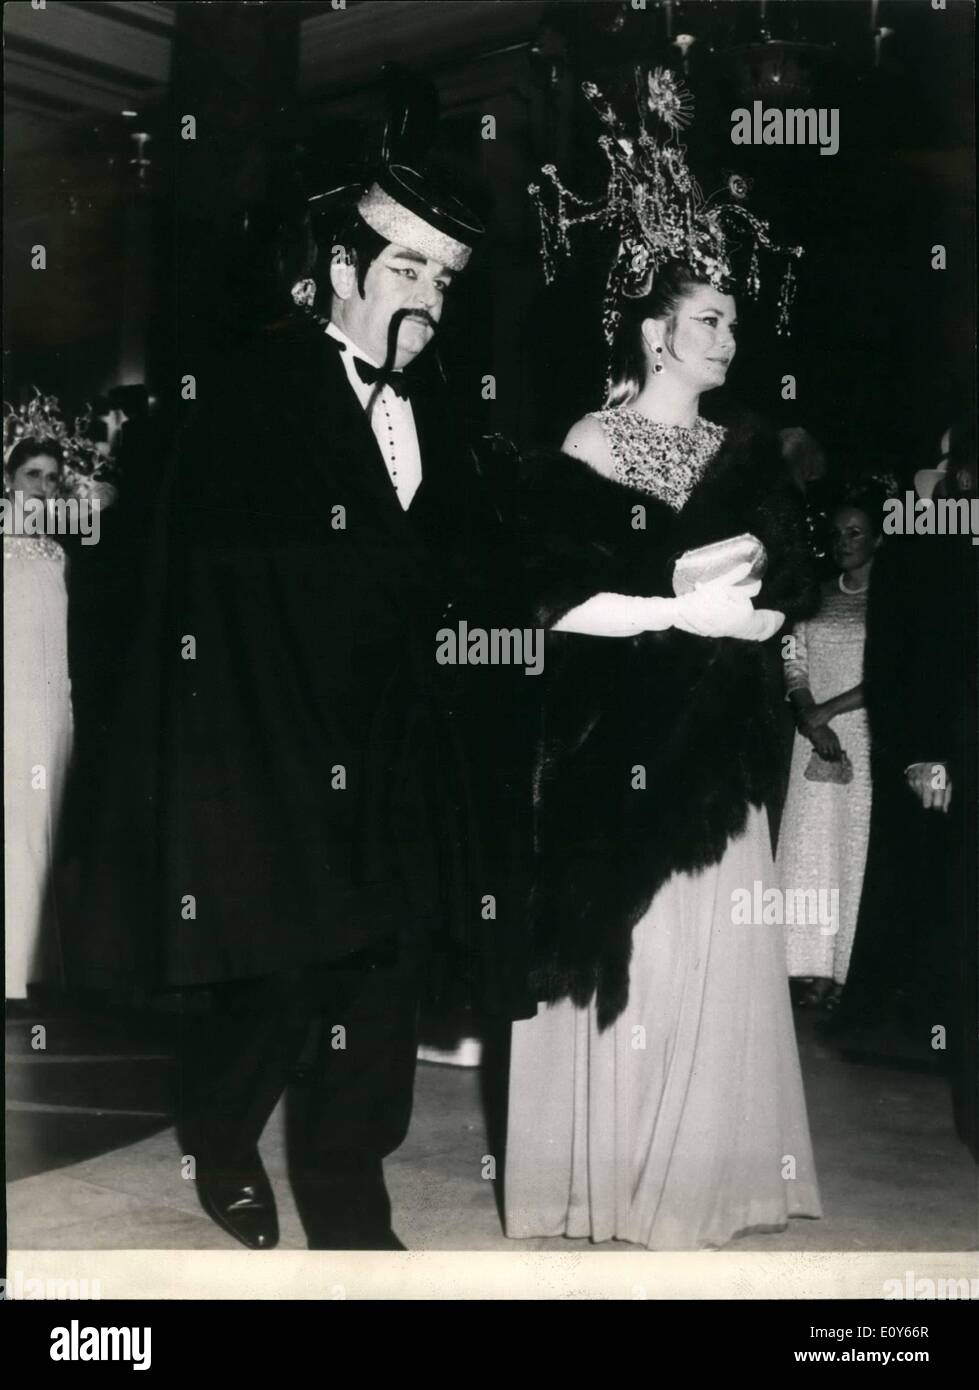 Mar. 03, 1969 - Fancy dress ball in Monte Carlo; A Fancy dress ball patronized by Prince Rainer and Princess Grace was held in the Monte Carlo Casino yesterday. Photo Shows Prince Rainier dressed as a Mandarin pictured with Princess grace displaying a fancy headdress. Stock Photo